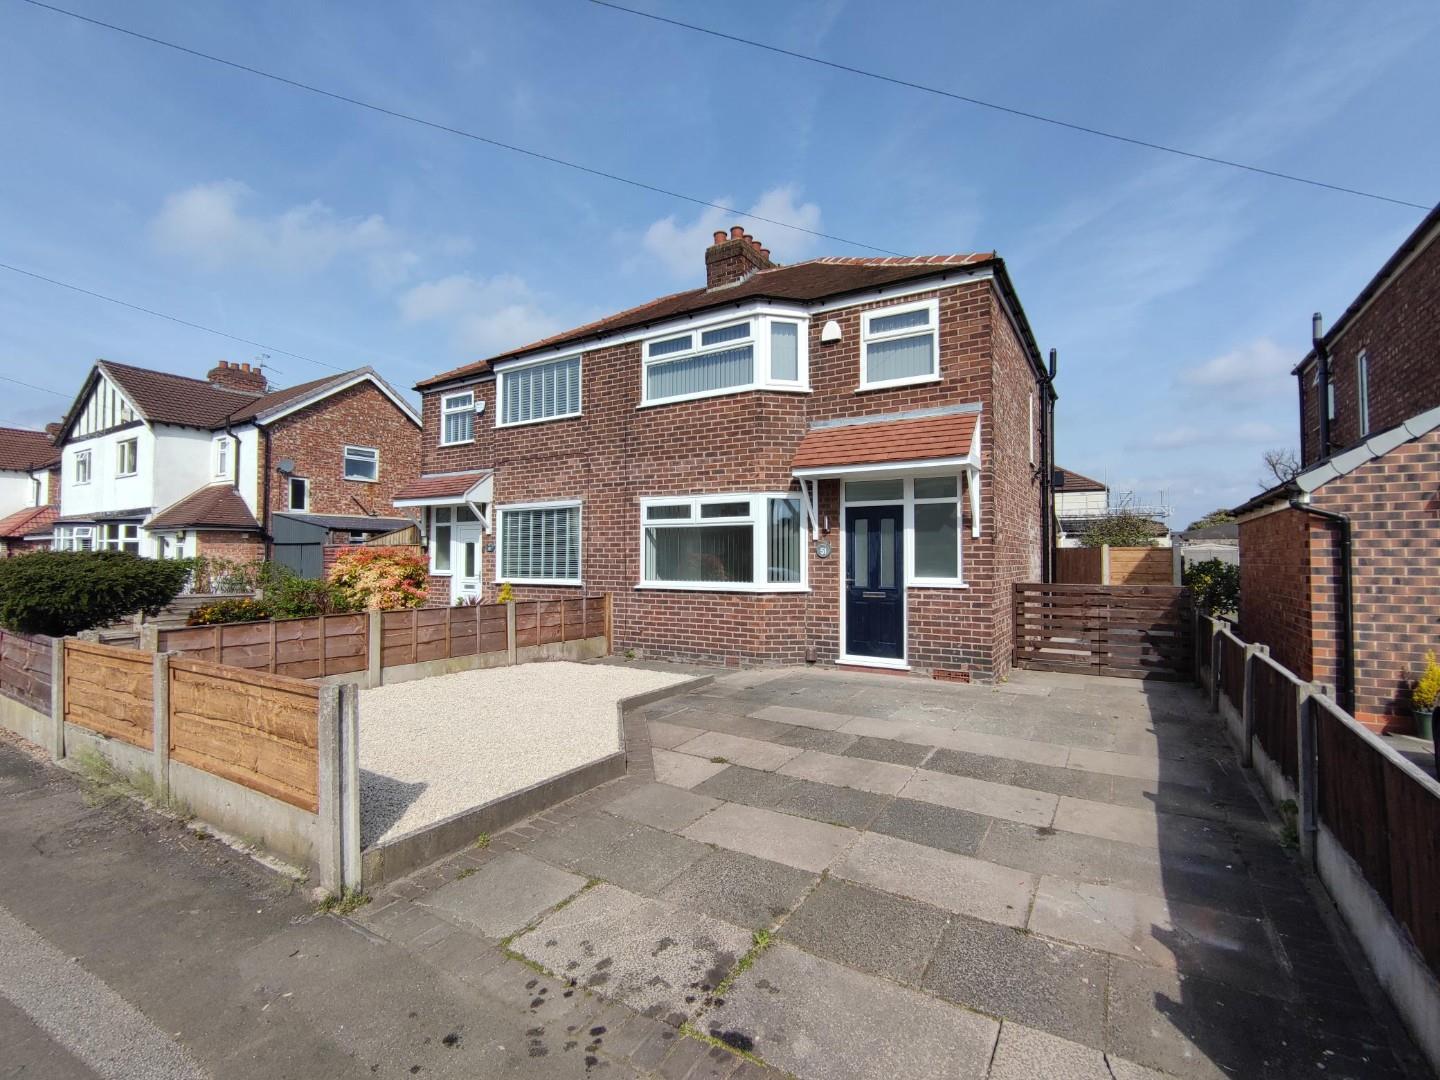 3 bed semi-detached house to rent in Foxhall Road, Altrincham - Property Image 1